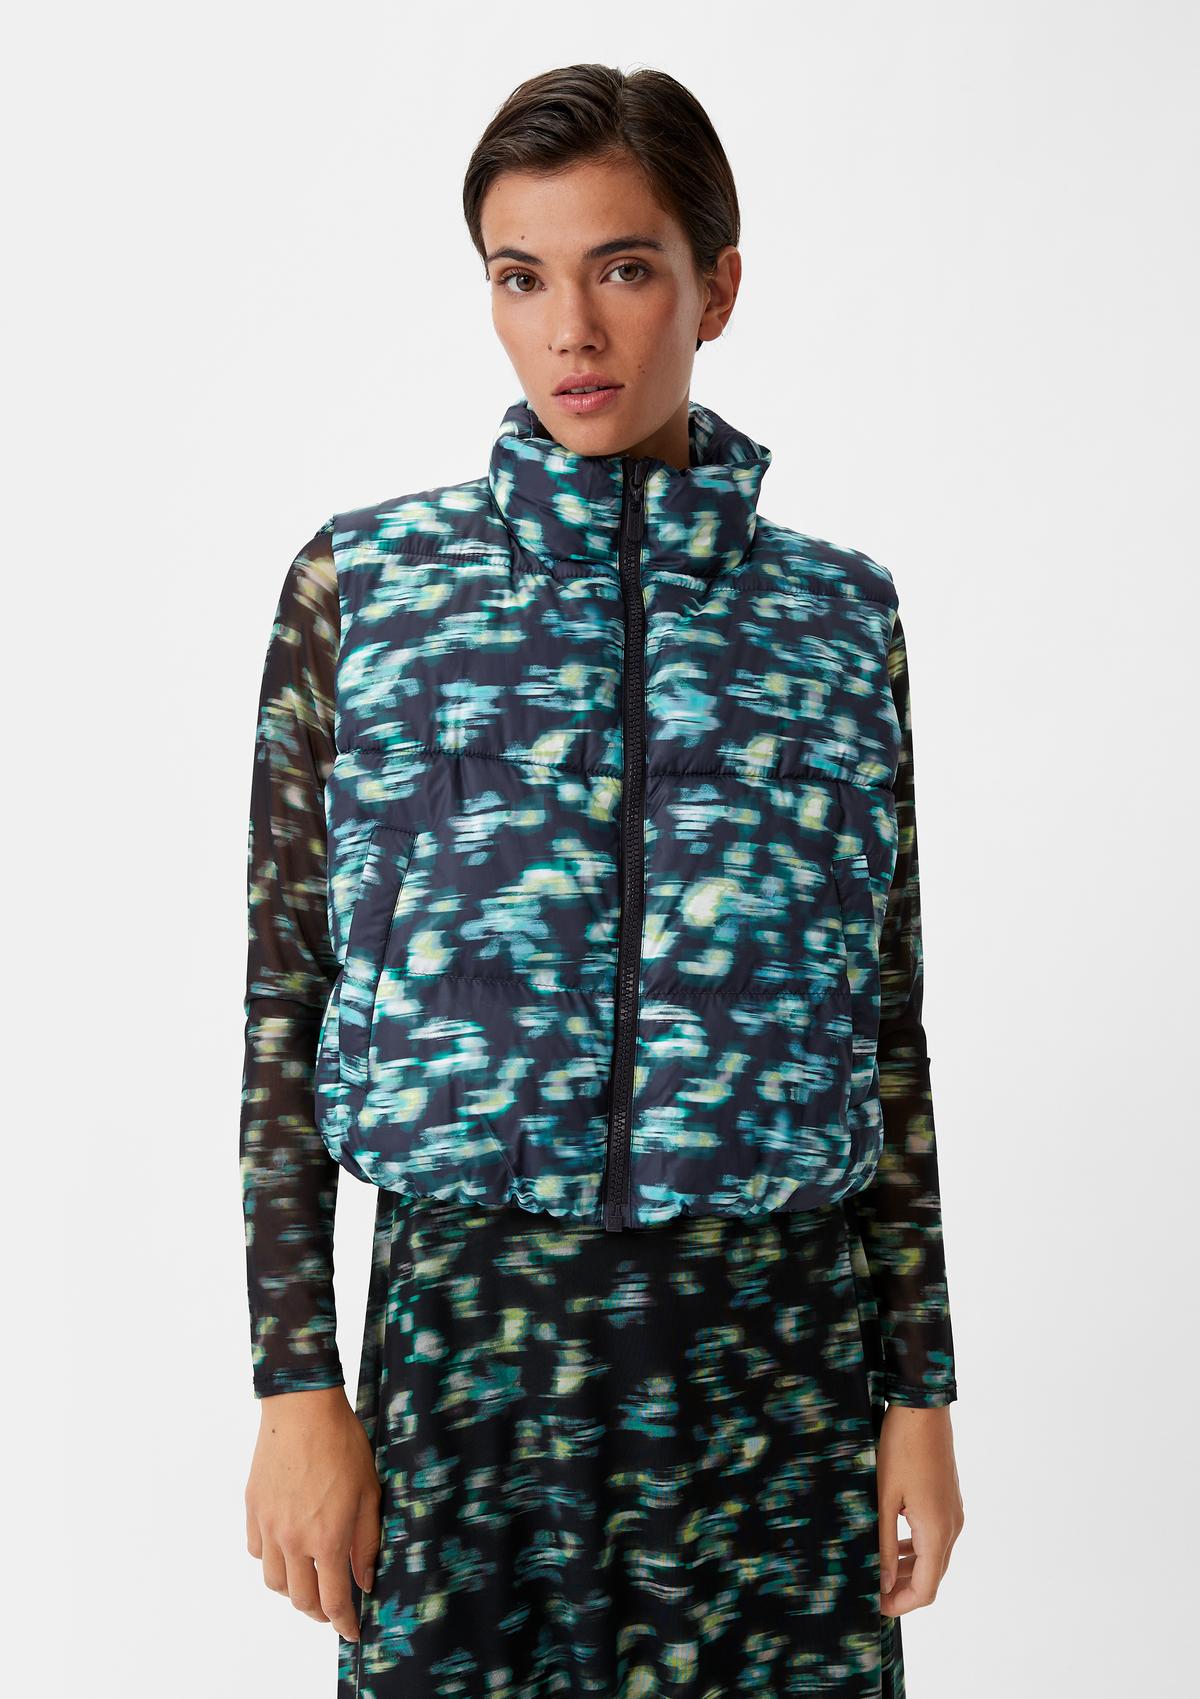 Quilted body warmer with an all-over pattern